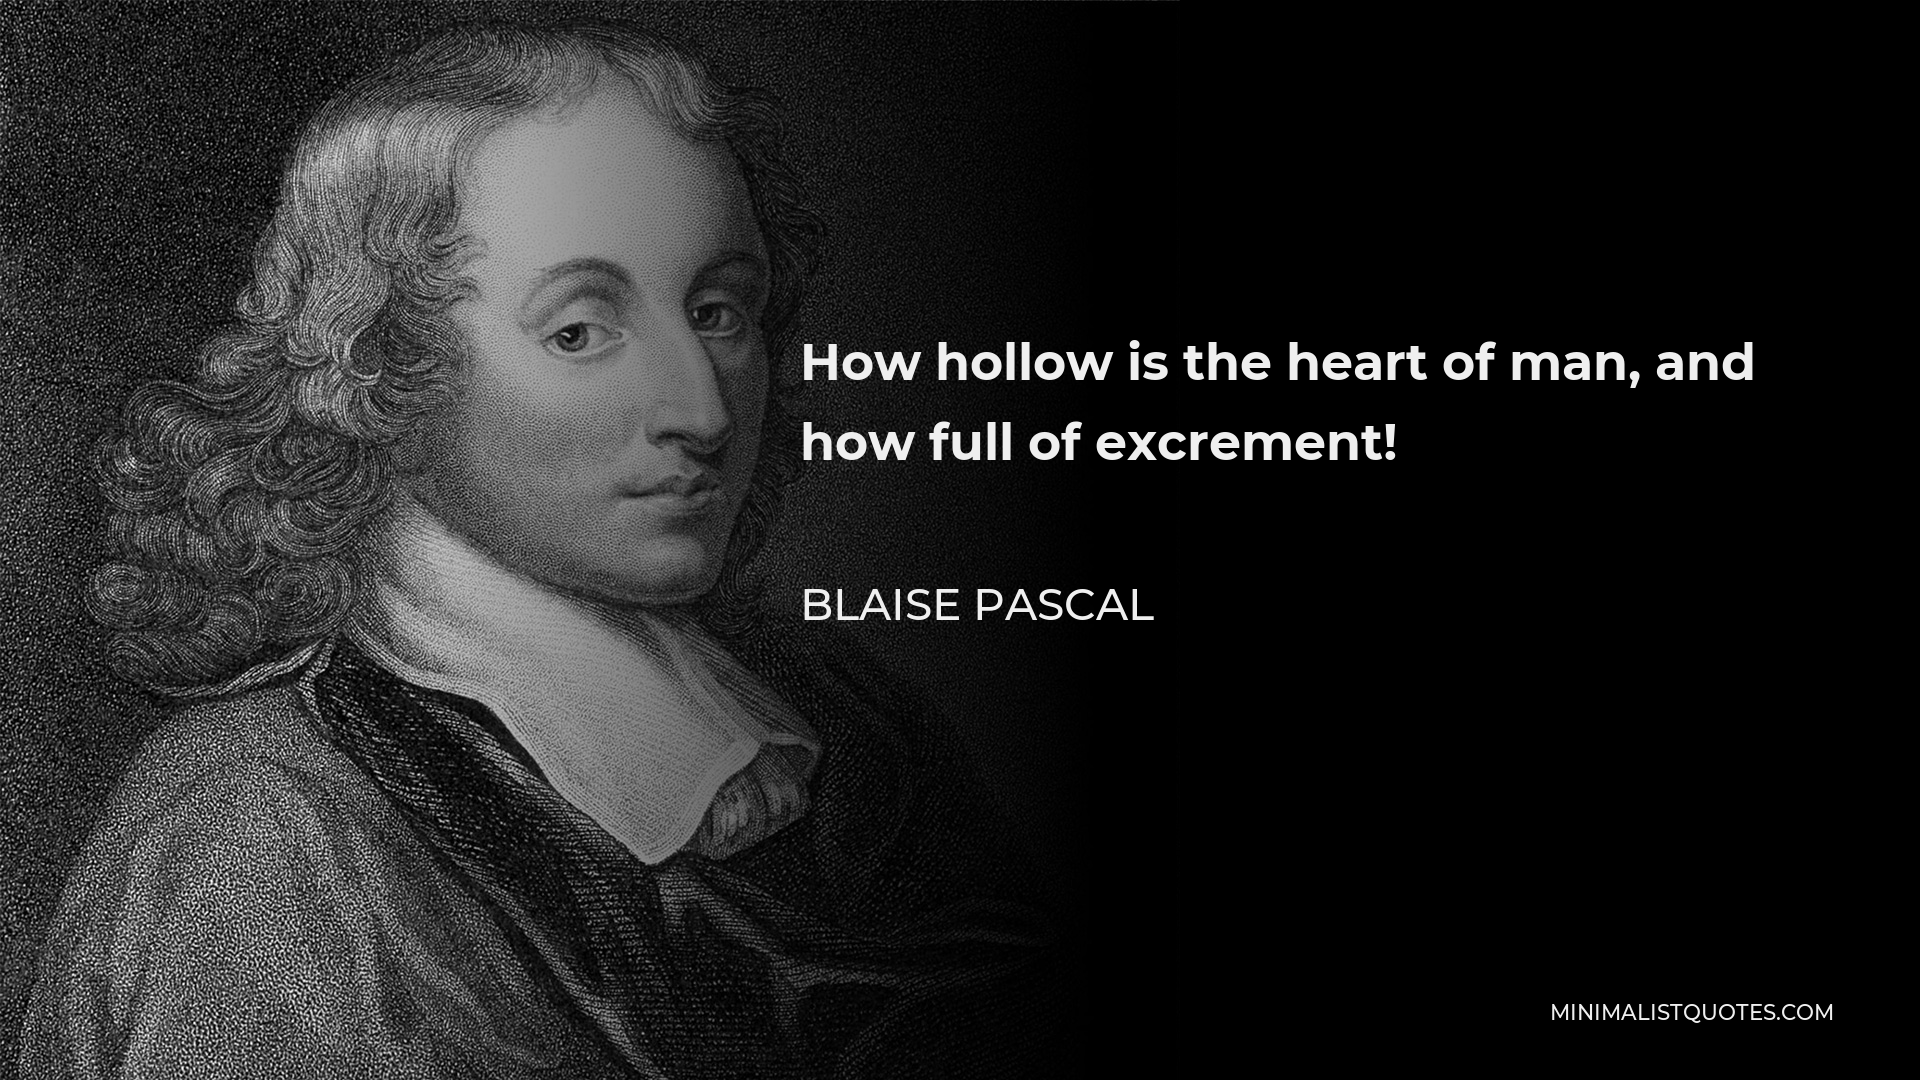 Blaise Pascal Quote - How hollow is the heart of man, and how full of excrement!